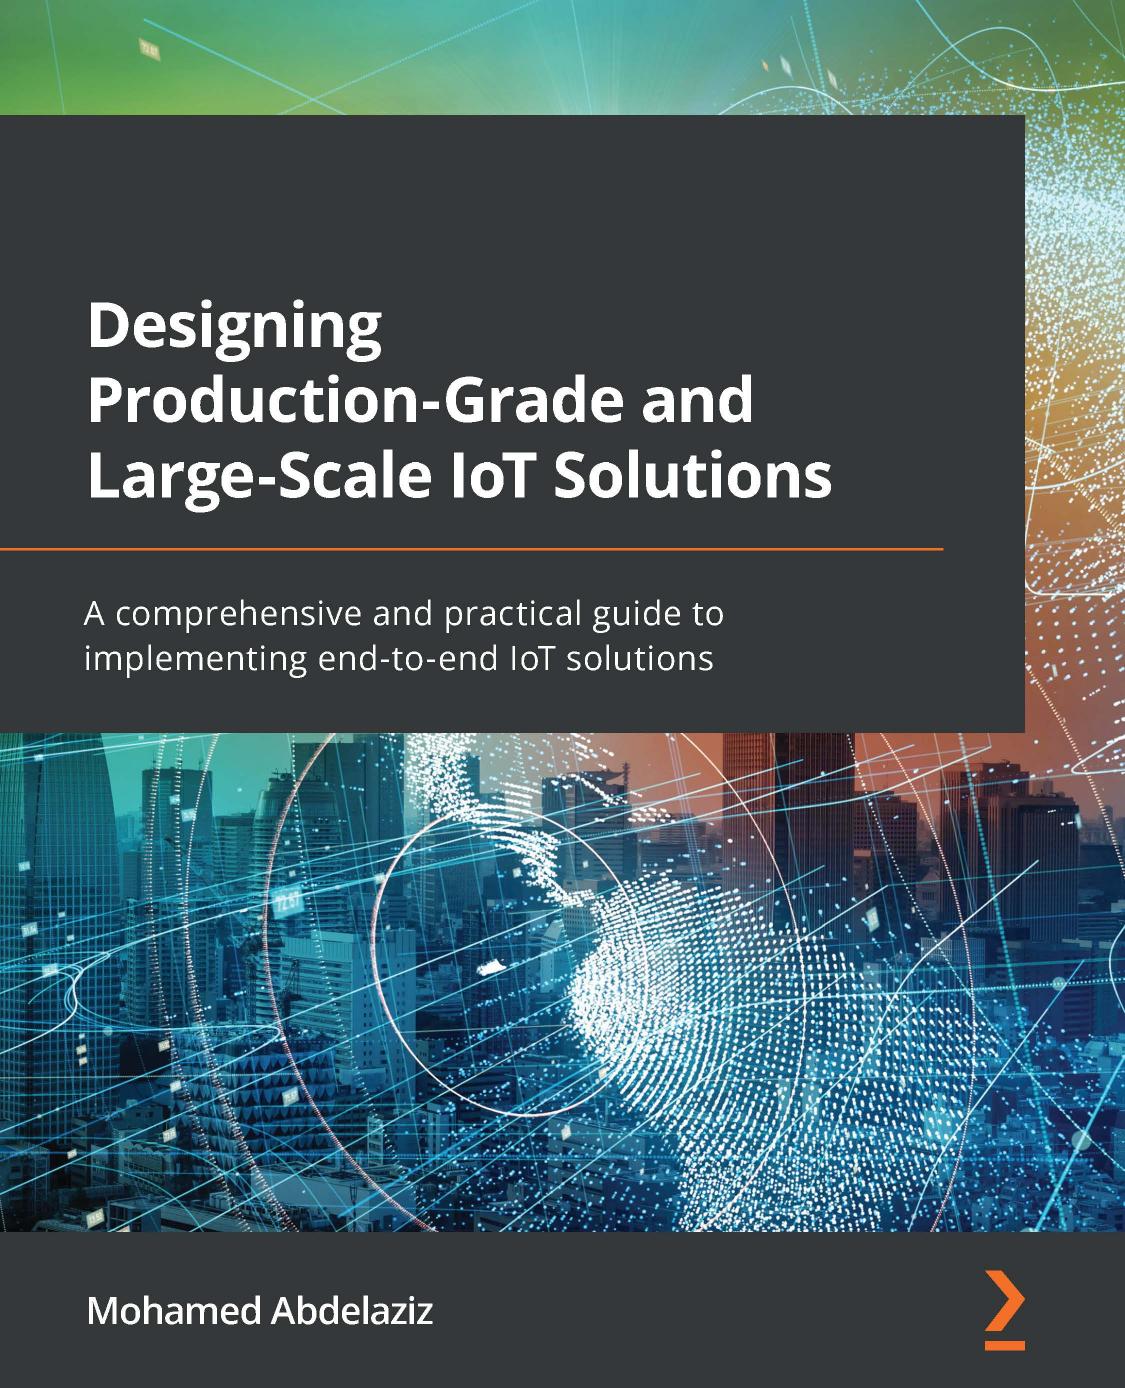 Designing Production-Grade and Large-Scale IoT Solutions: A Comprehensive and Practical Guide to Implementing End-To-End IoT Solutions